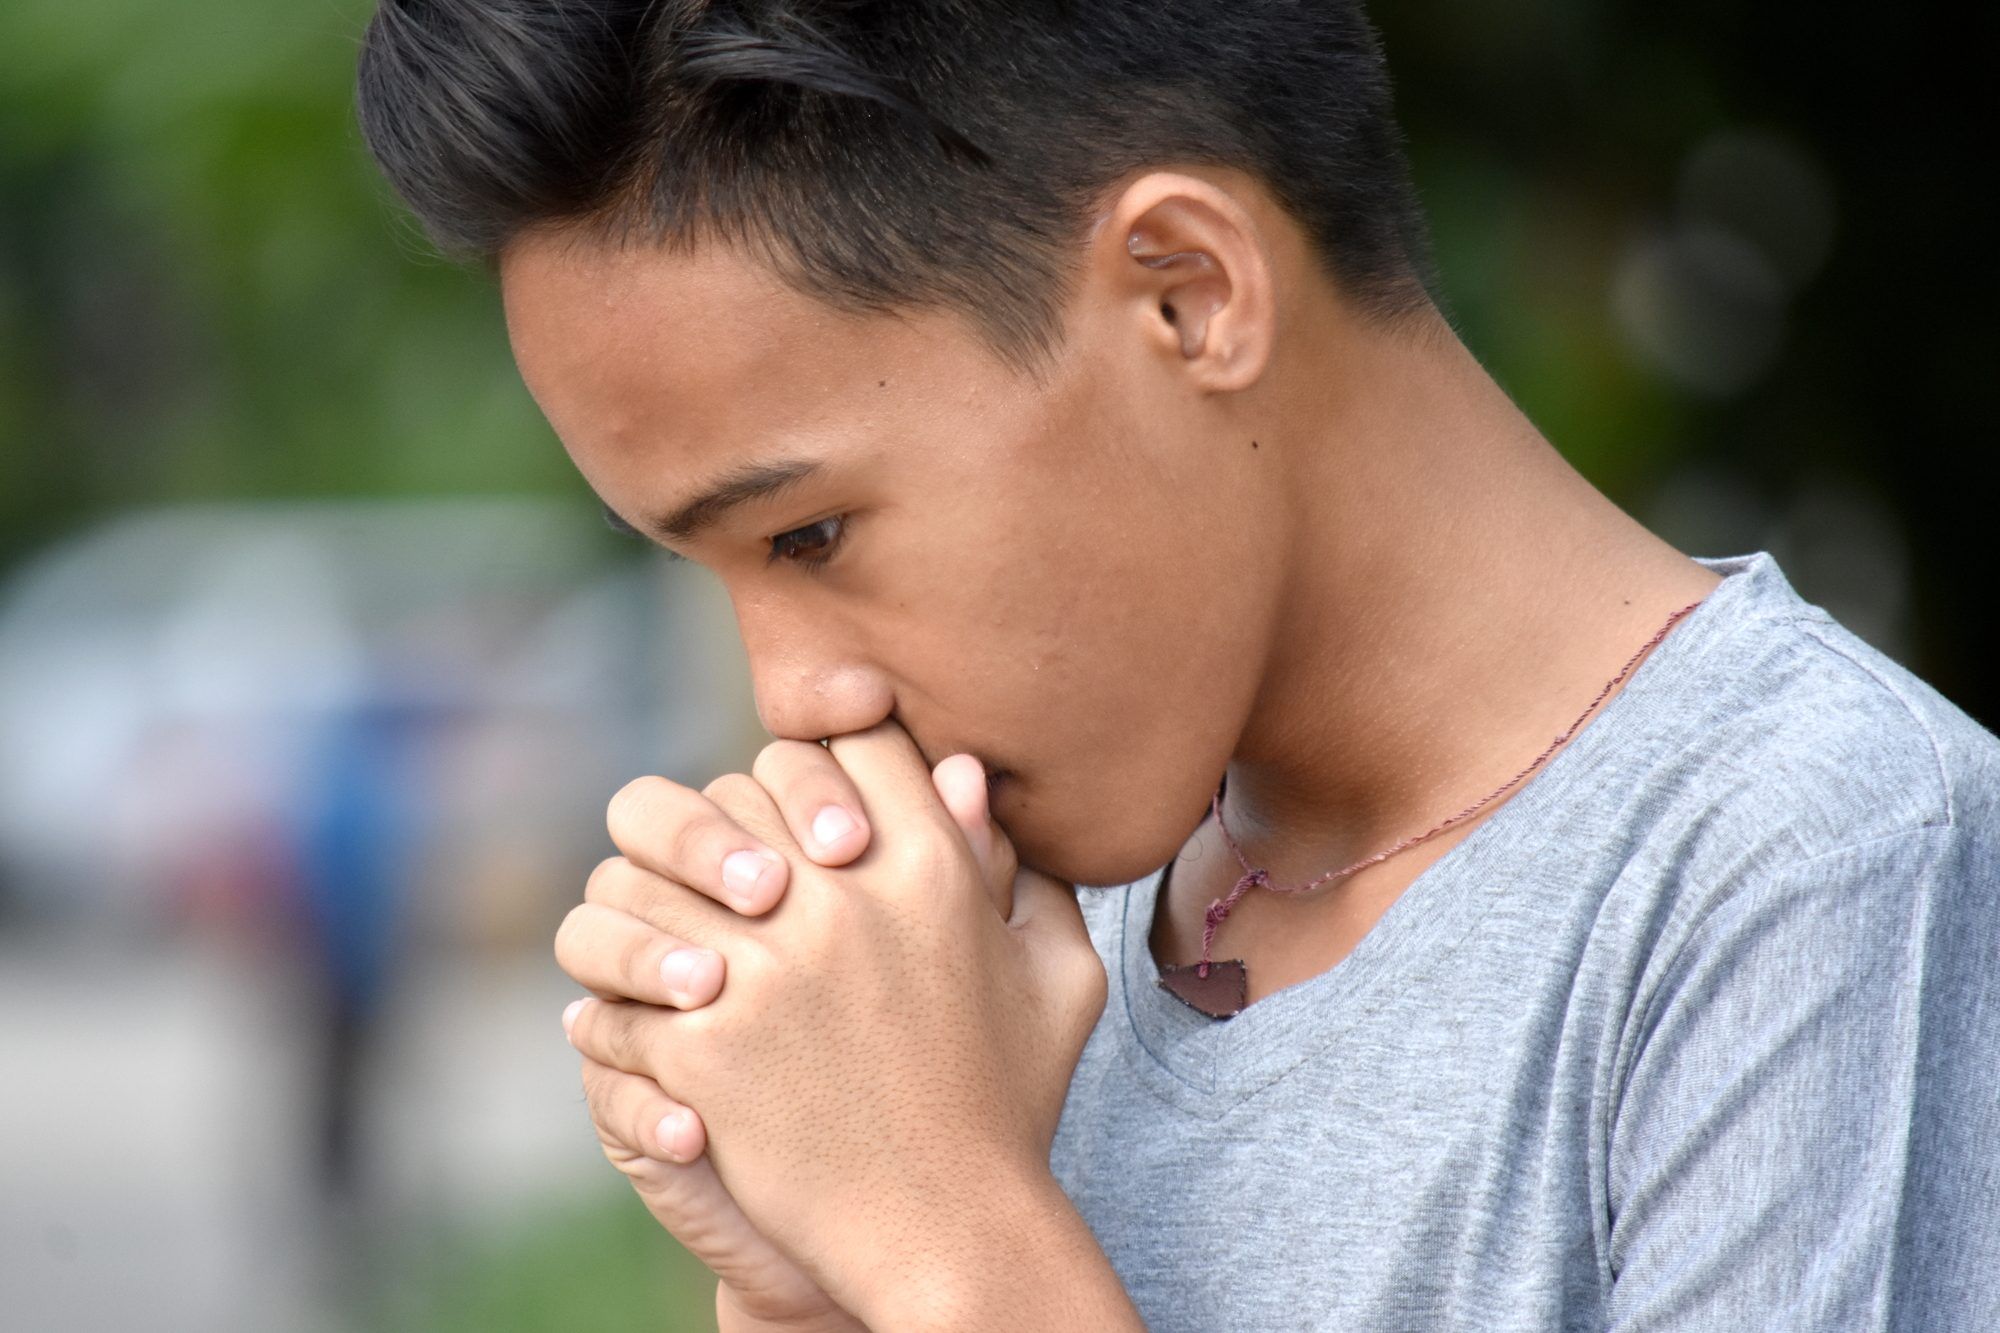 Praying teen boy with serious expression